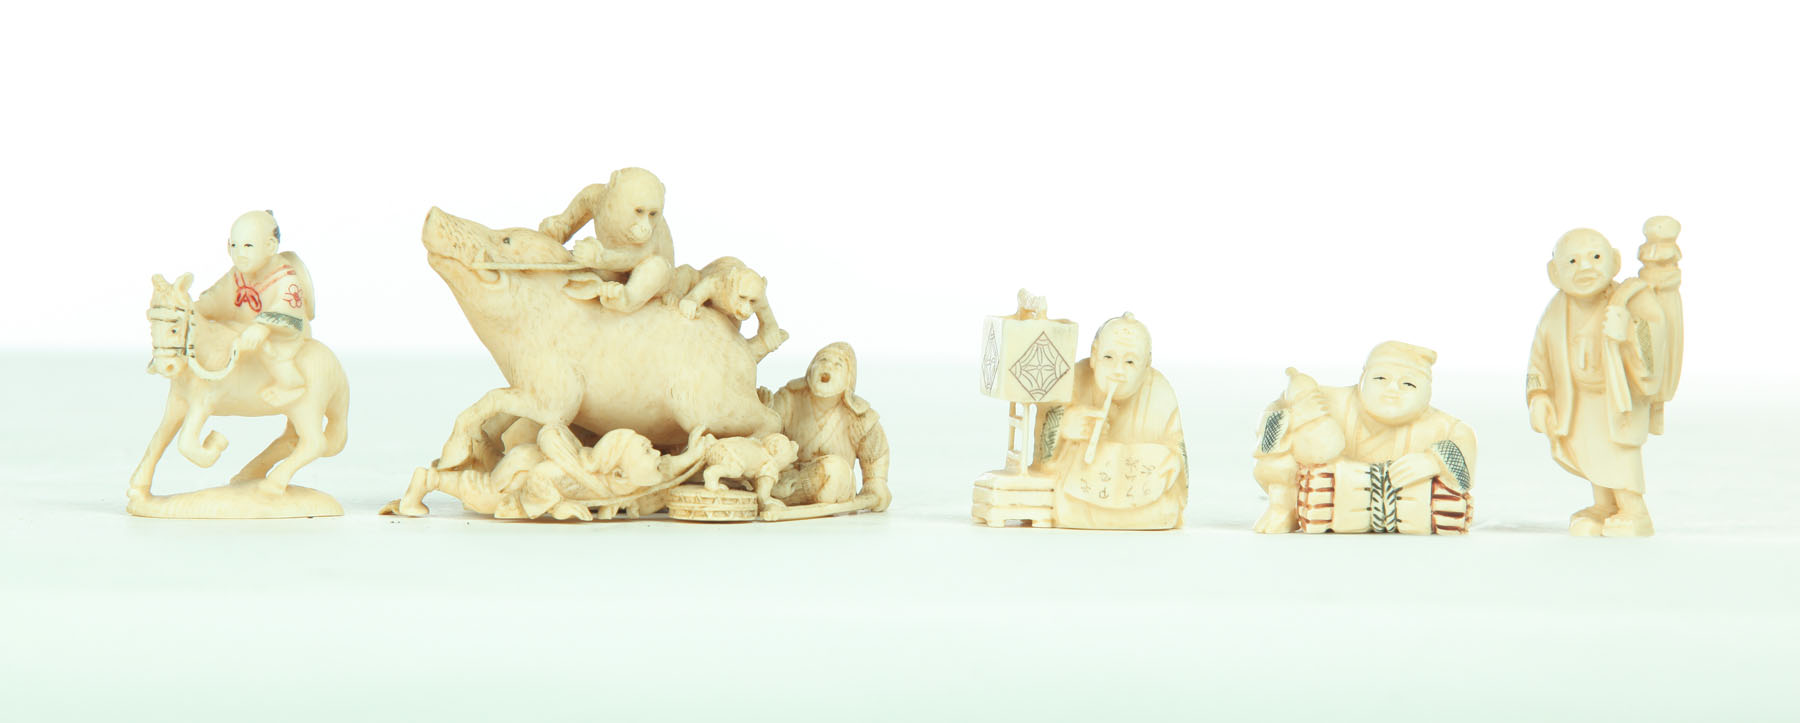 FIVE IVORY CARVINGS.  Japan  20th century.